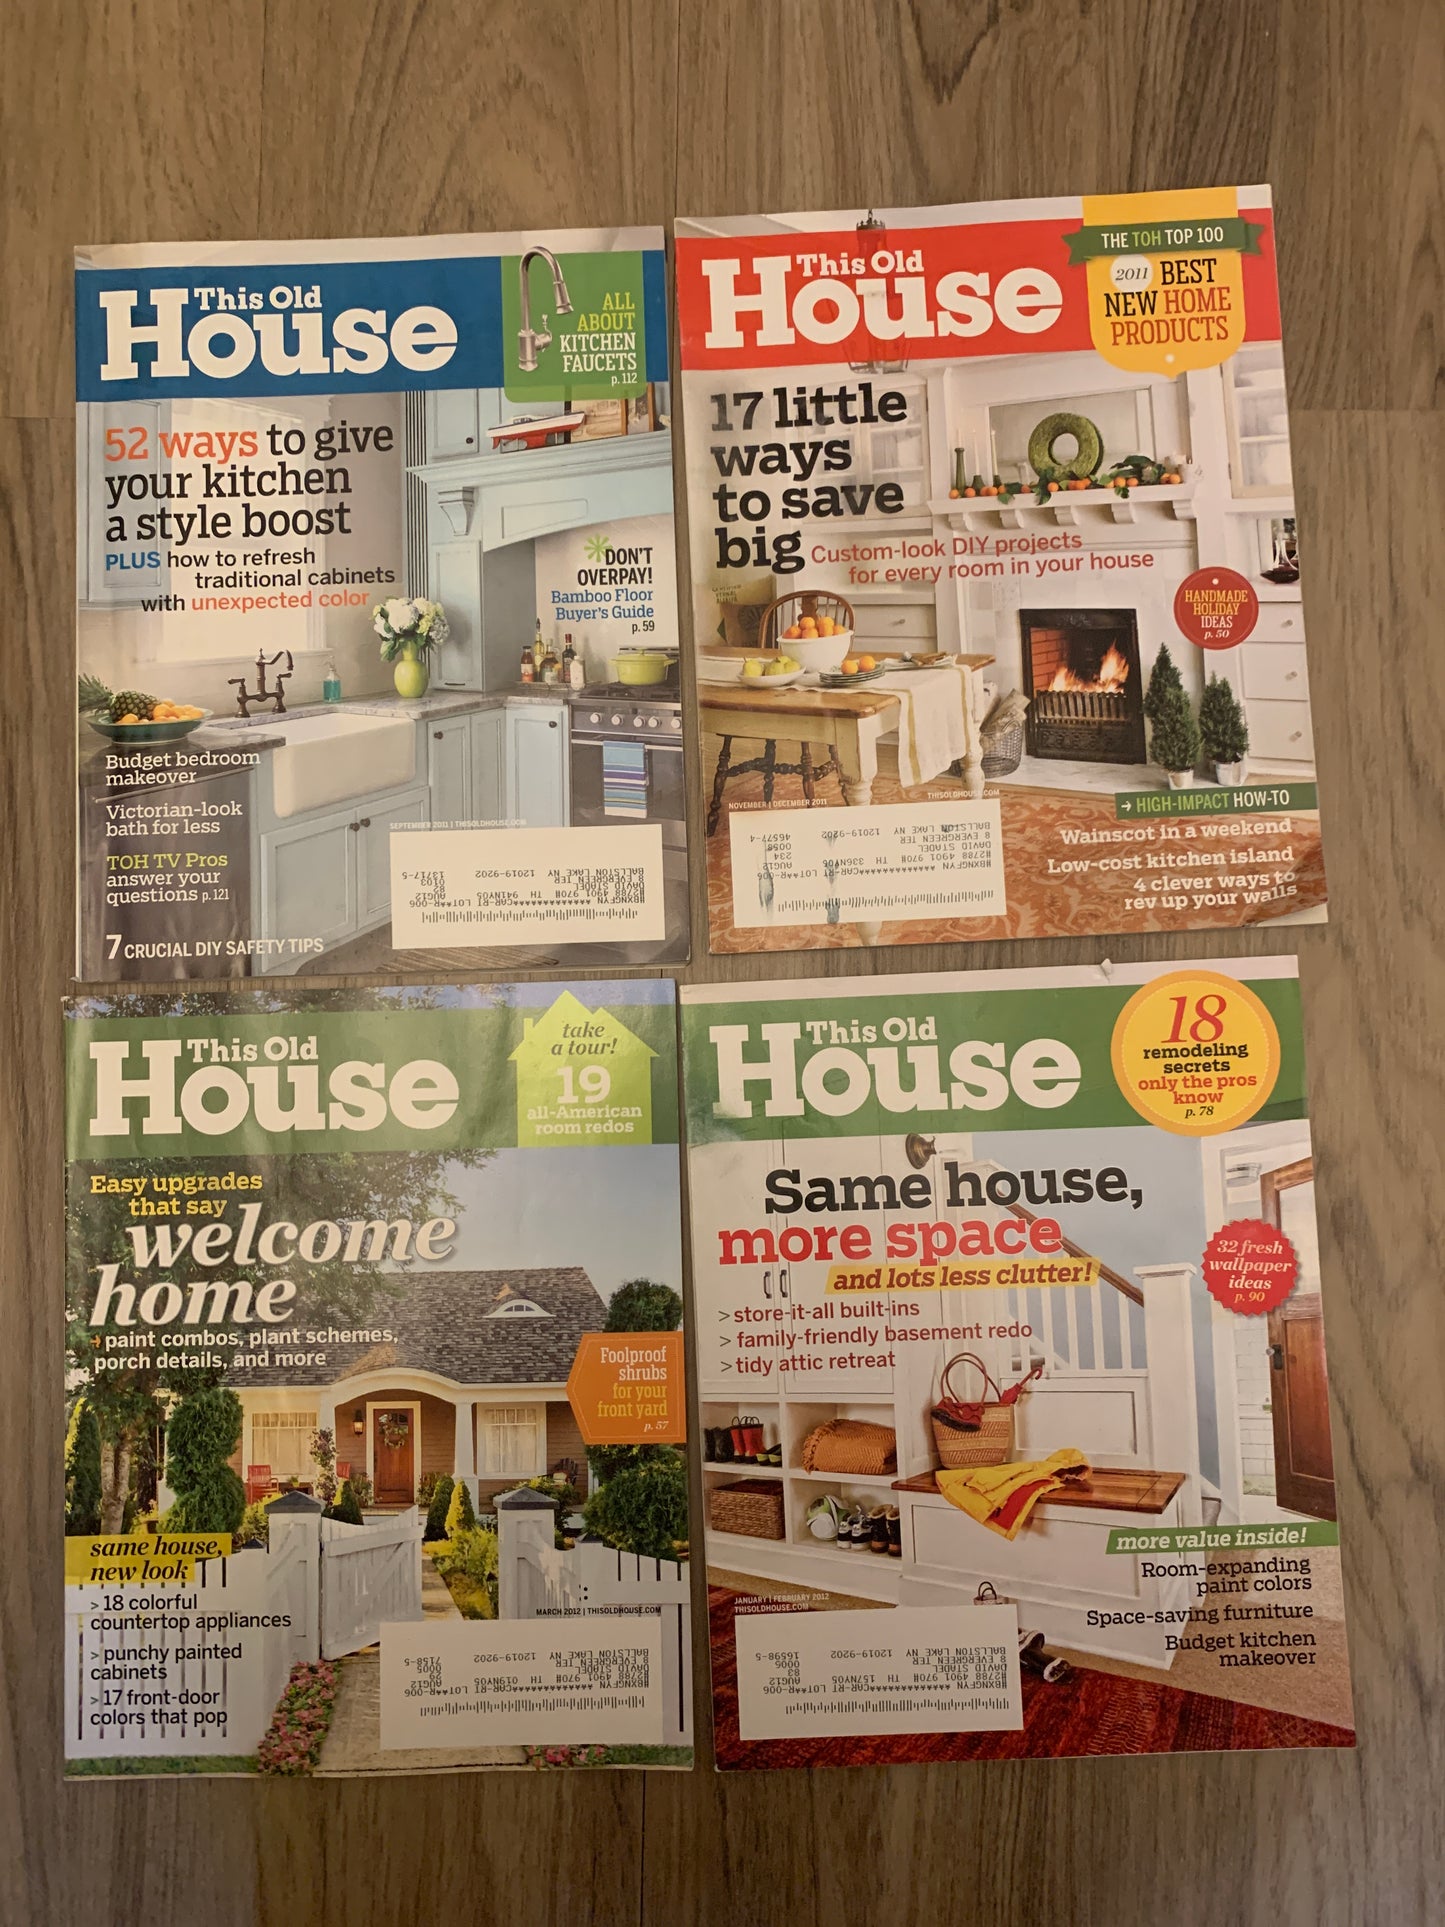 This Old House Magazine, 2011-2012 [lot of 4]